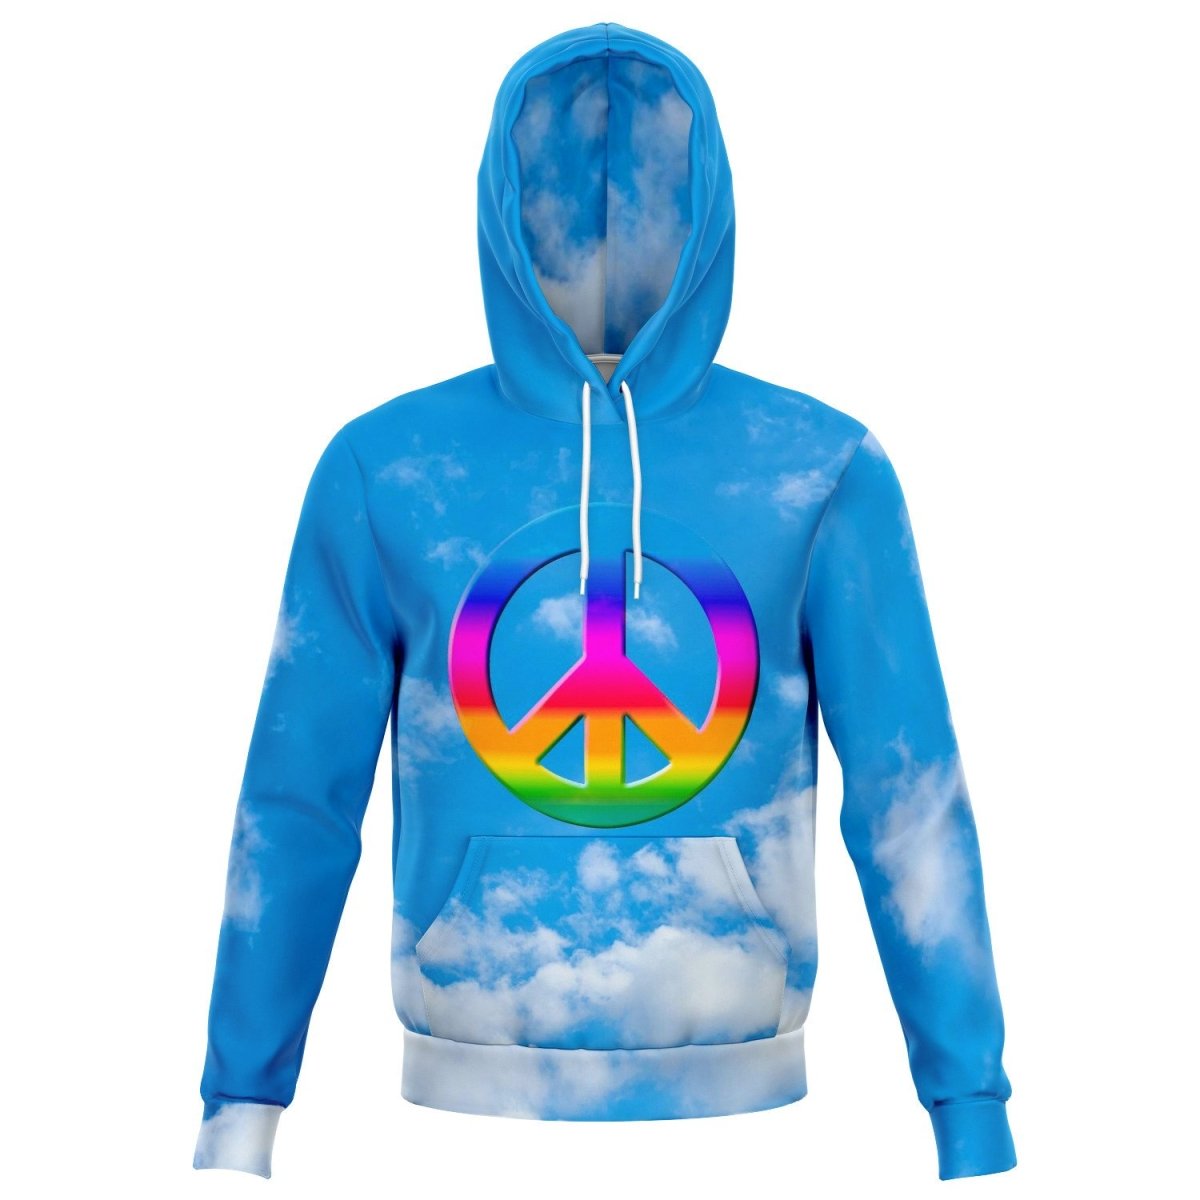 THE COMFY COLLECTION "PEACE" ALL OVER HOODIE - dragqueenmerch